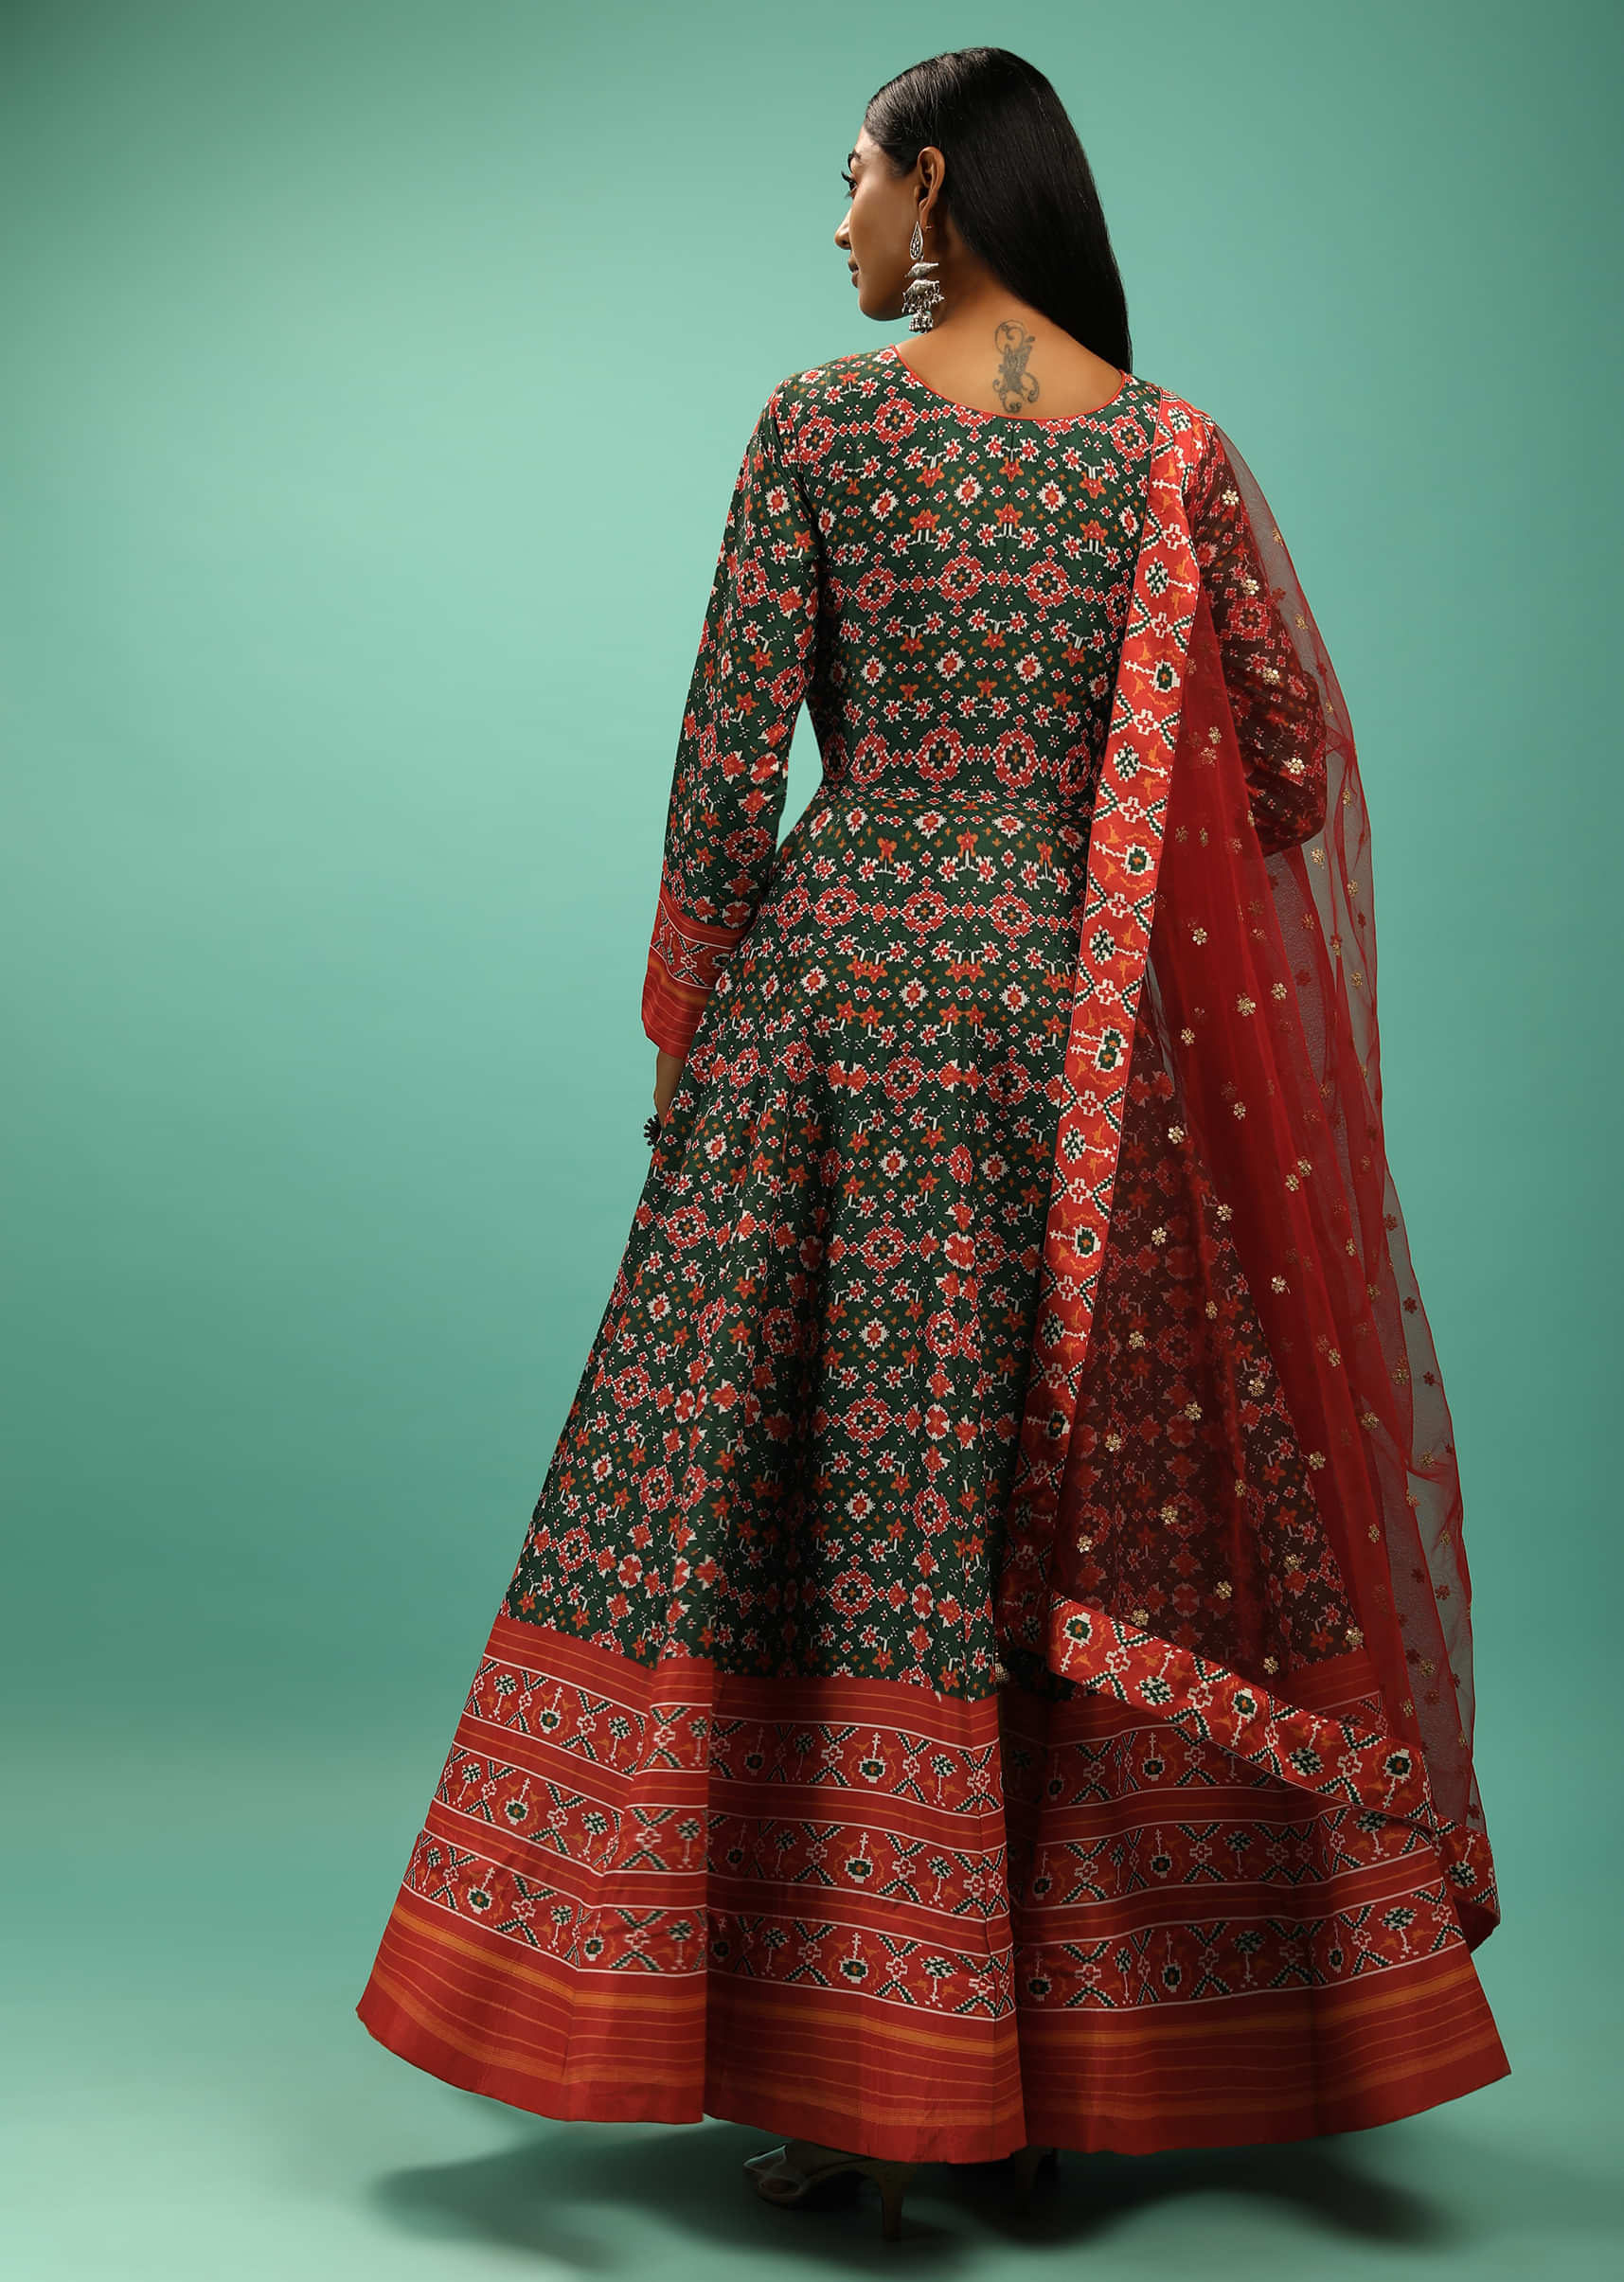 Forest Green Anarkali Suit With Multi Colored Patola Print And Zardosi Embroidery  